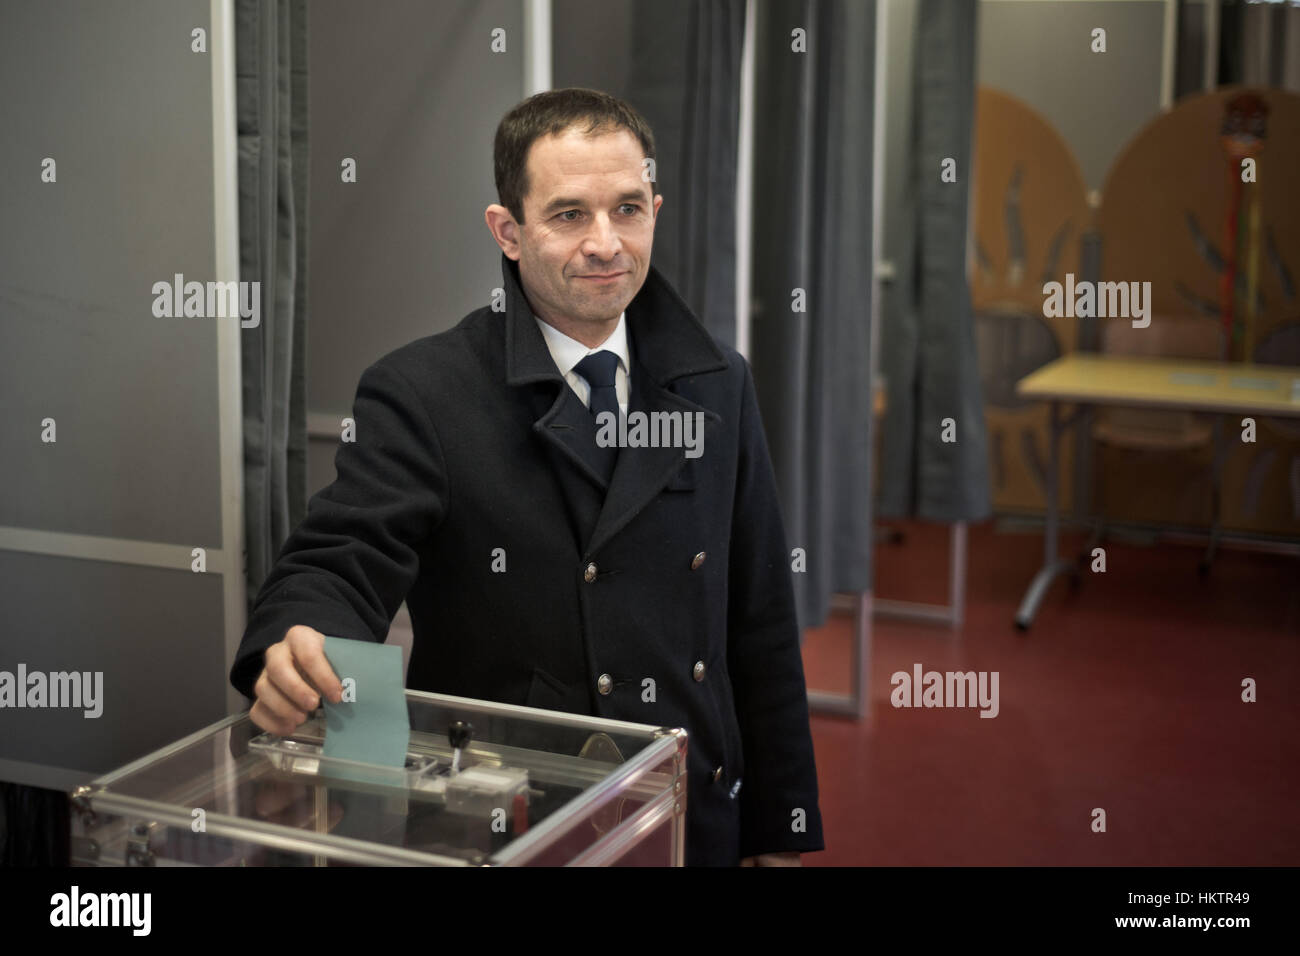 Trappes, France. 29th Jan, 2017. Benoit Hamon casts his ballot during the second round of left primary at a polling station in Trappes, France. Benoit Hamon, former education minister and traditional left-winger, on Sunday became the Left candidate for France's upcoming presidential election after beating his rival Manuel Valls in the primary run-off, partial results showed. Credit: Xinhua/Alamy Live News Stock Photo